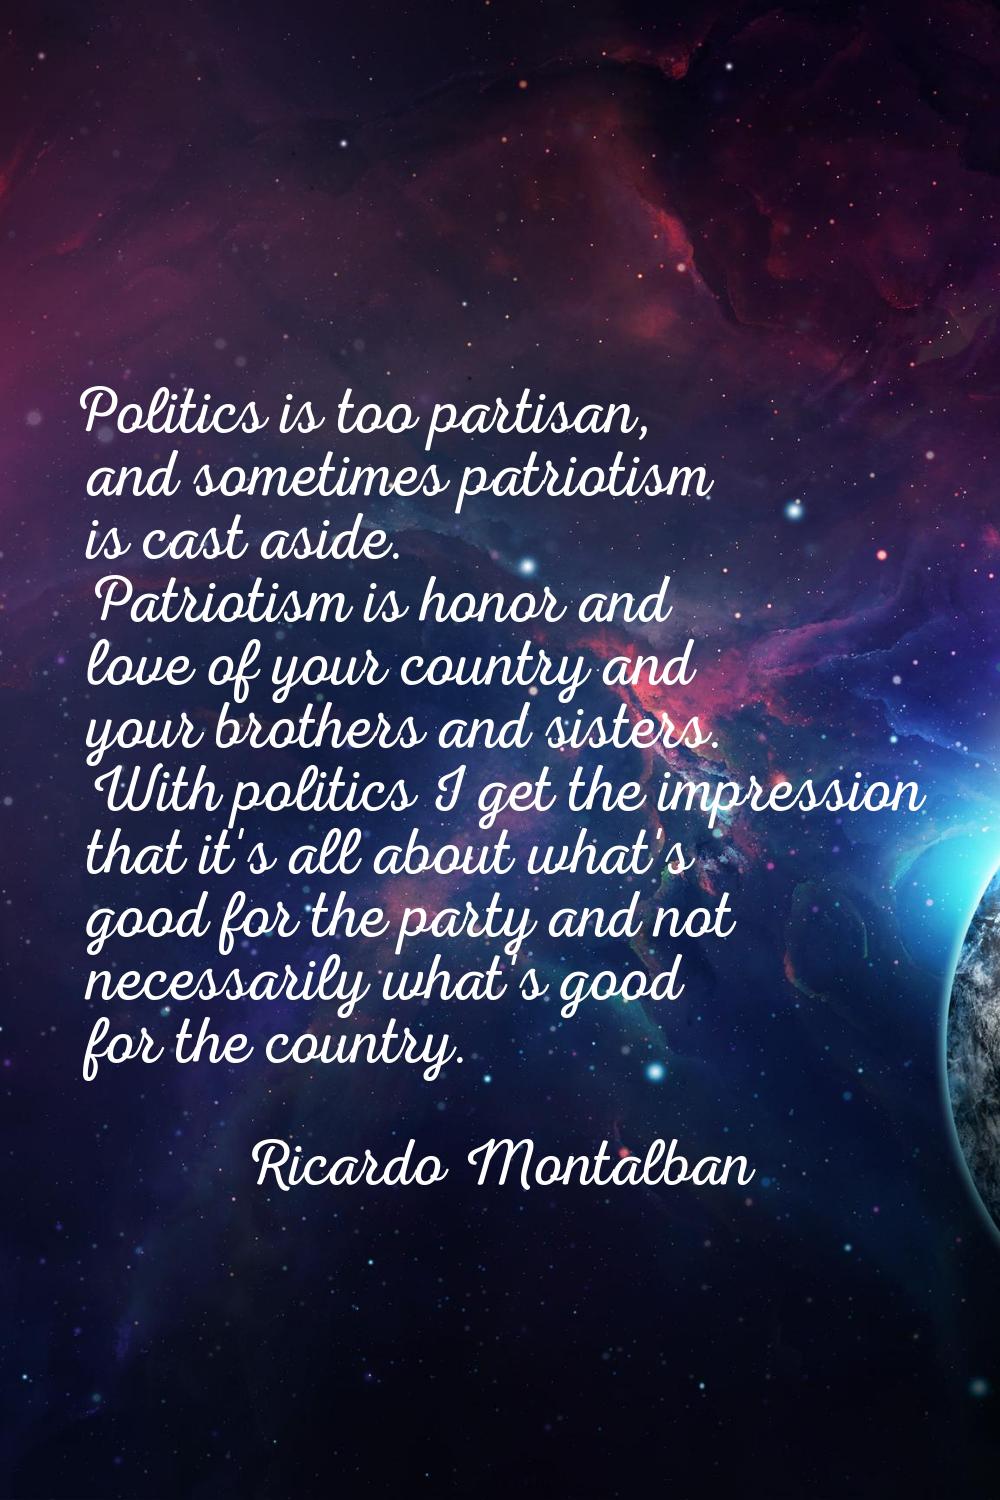 Politics is too partisan, and sometimes patriotism is cast aside. Patriotism is honor and love of y